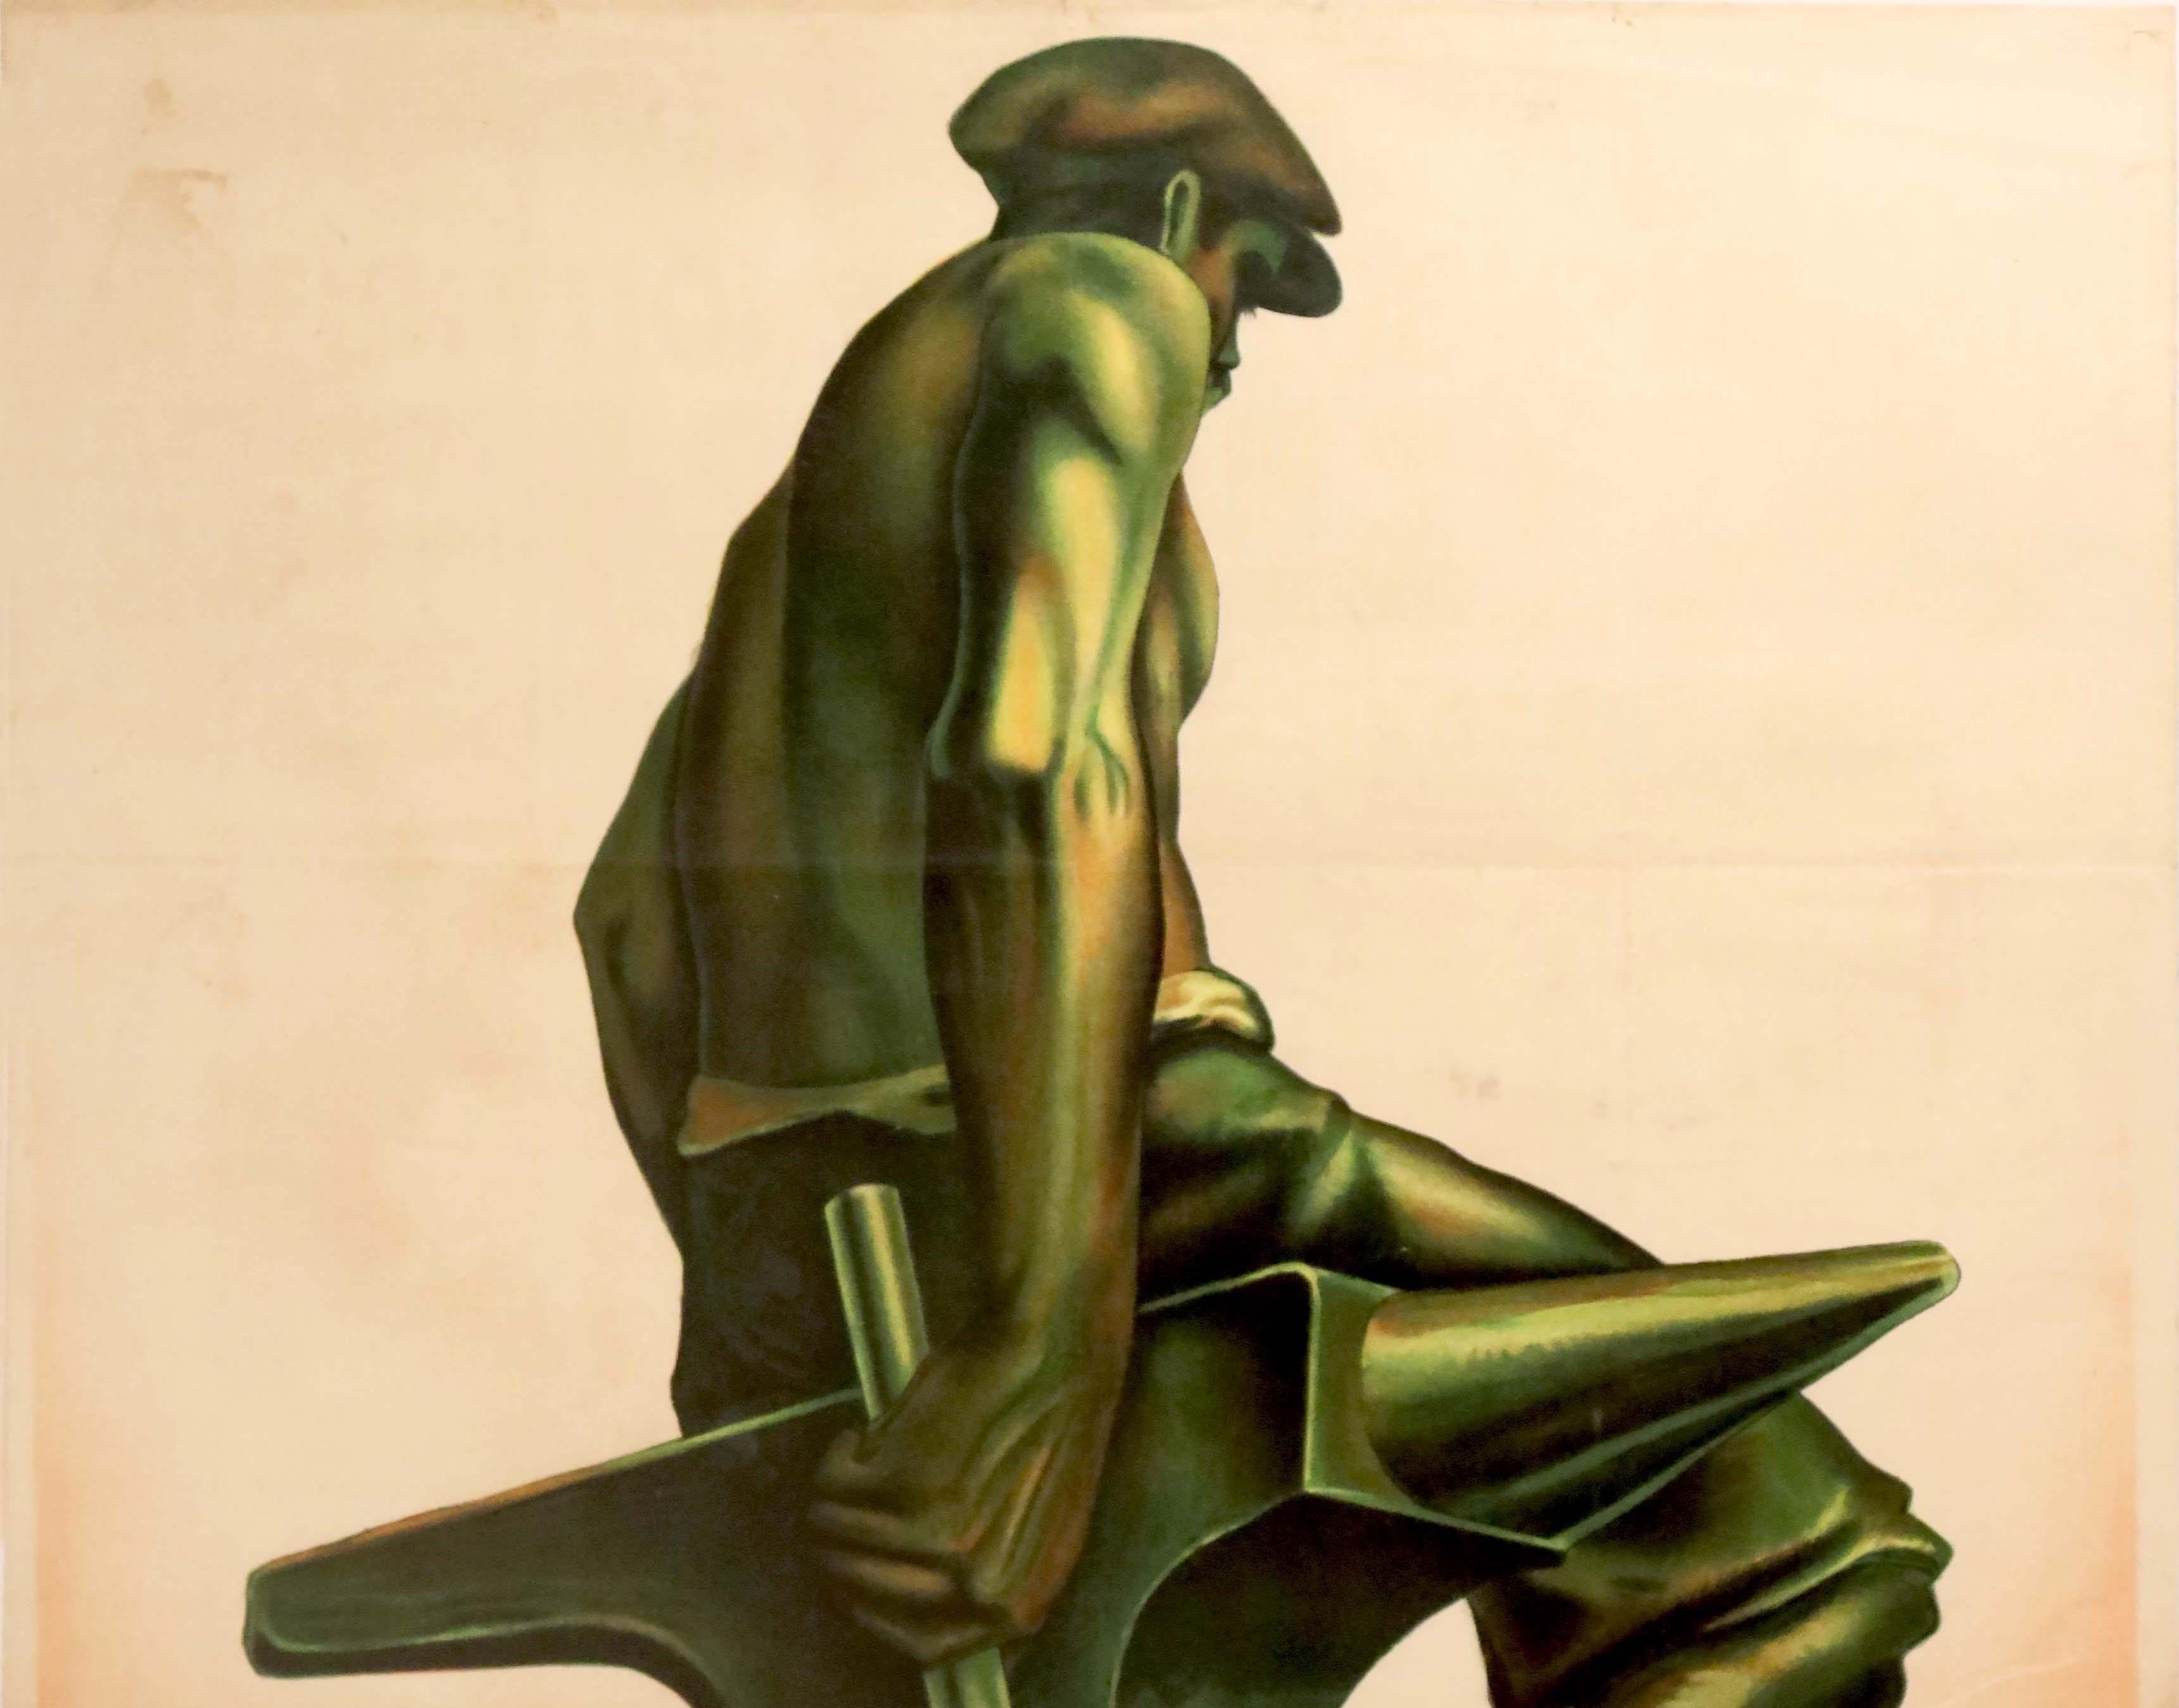 Original vintage advertising poster for the Liege 1930 International exhibition celebrating the Centenary of Independence of Belgium - Luik 1930 - featuring a stunning illustration of a statue of a worker on an anvil holding a hammer in his hand